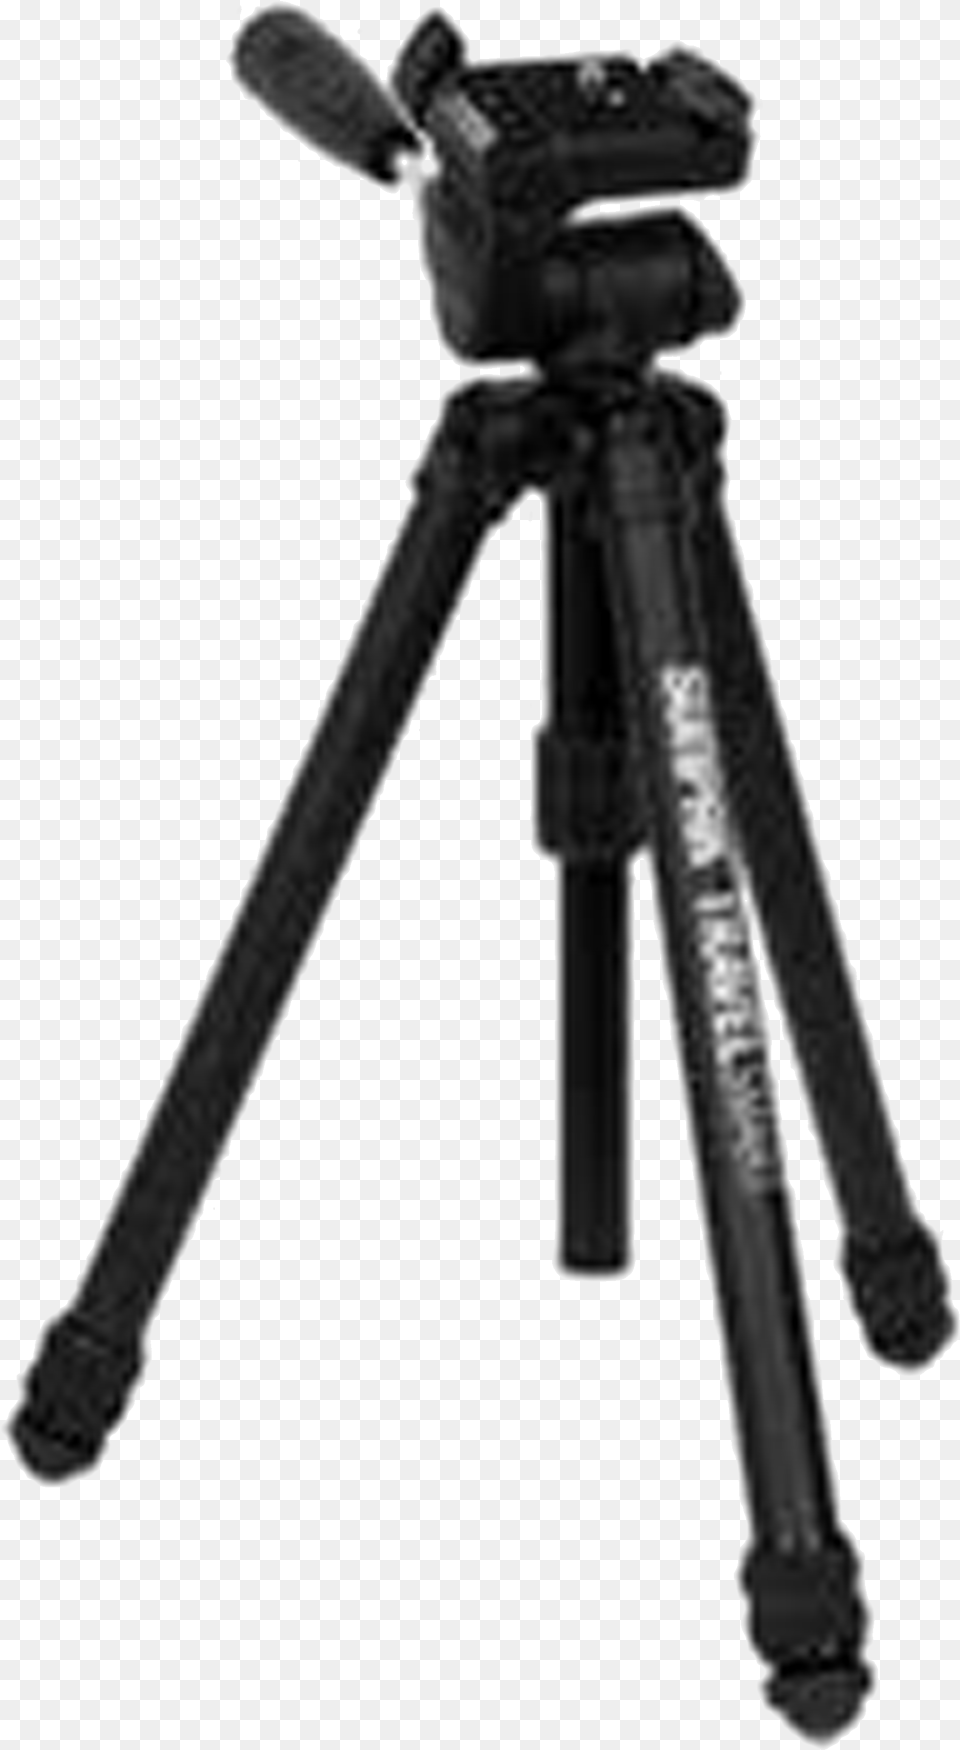 Tripod With Video Camera Icons And Tripod On Transparent Background Hd, Person, Mace Club, Weapon Png Image